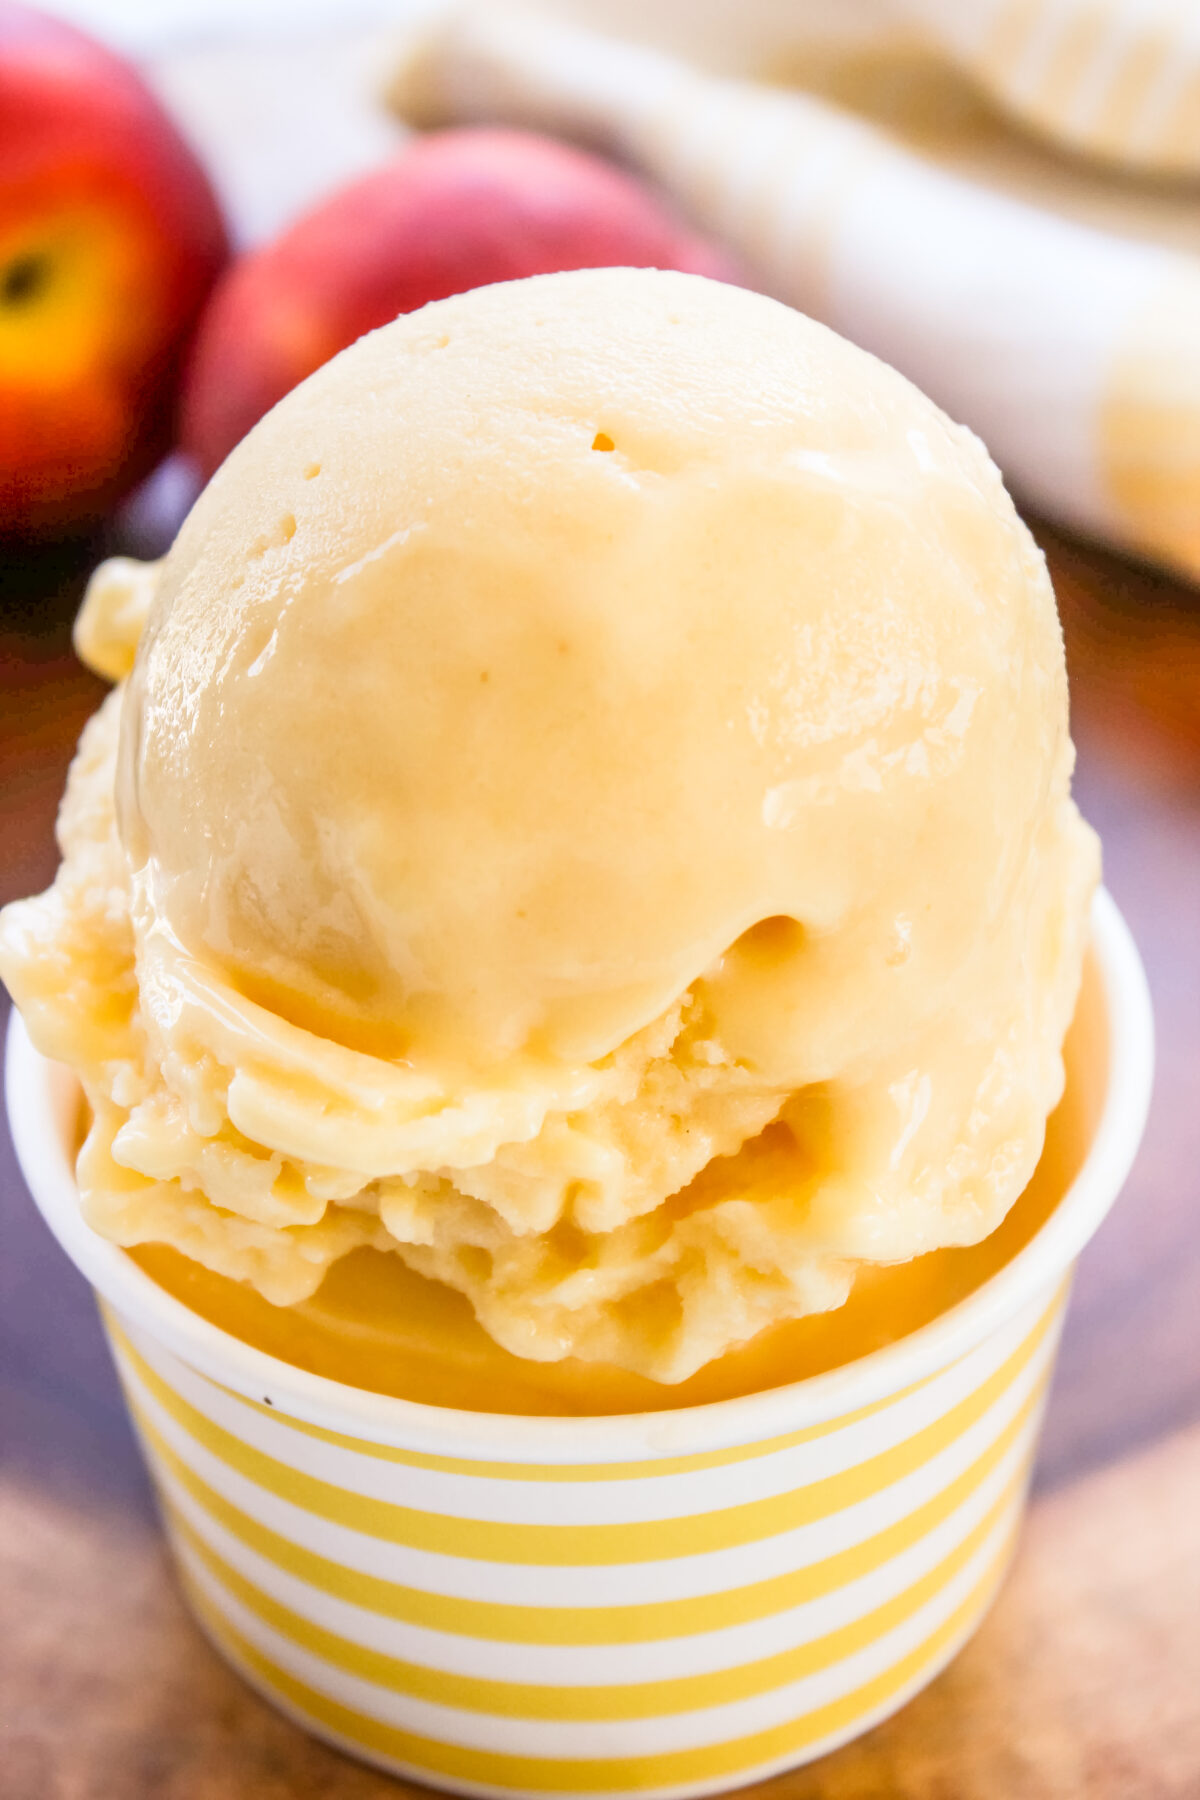 Just 3 simple ingredients and you can freeze up the taste of sunshine with this super easy blender Peach Ice Cream recipe!